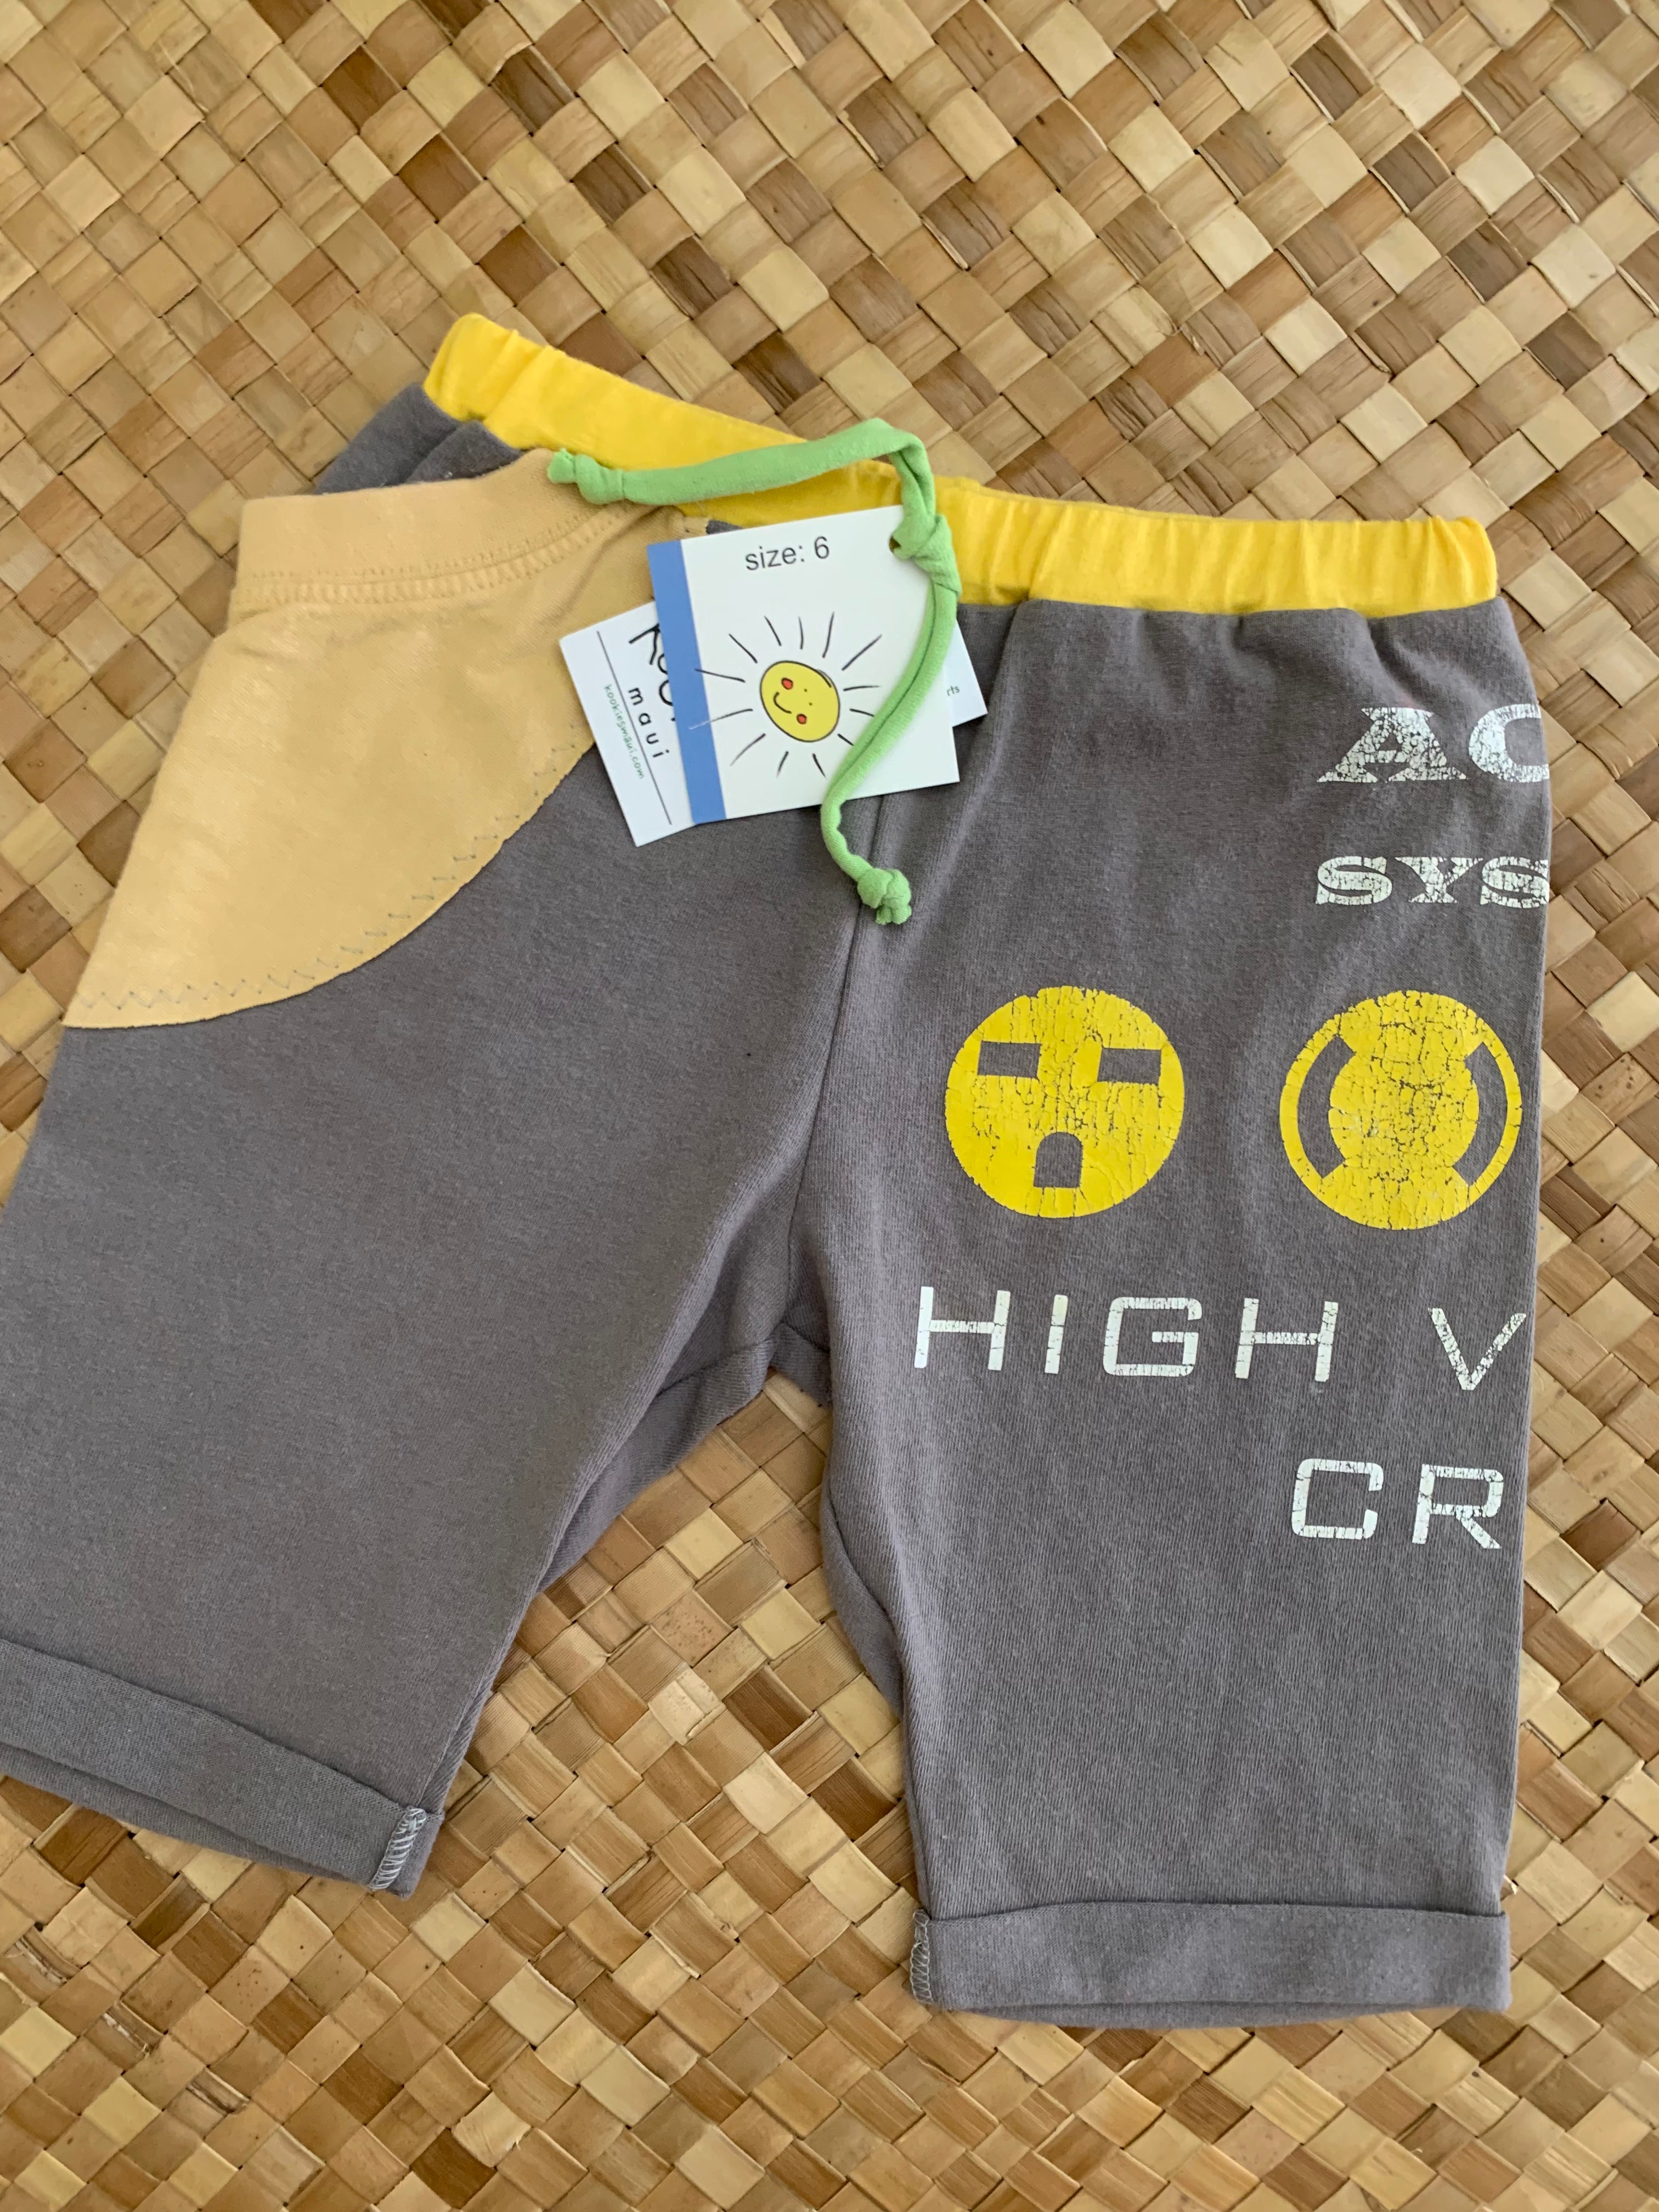 Kids Size 6 "Grey & Yellow High Voltage" Beach Comber Shorts